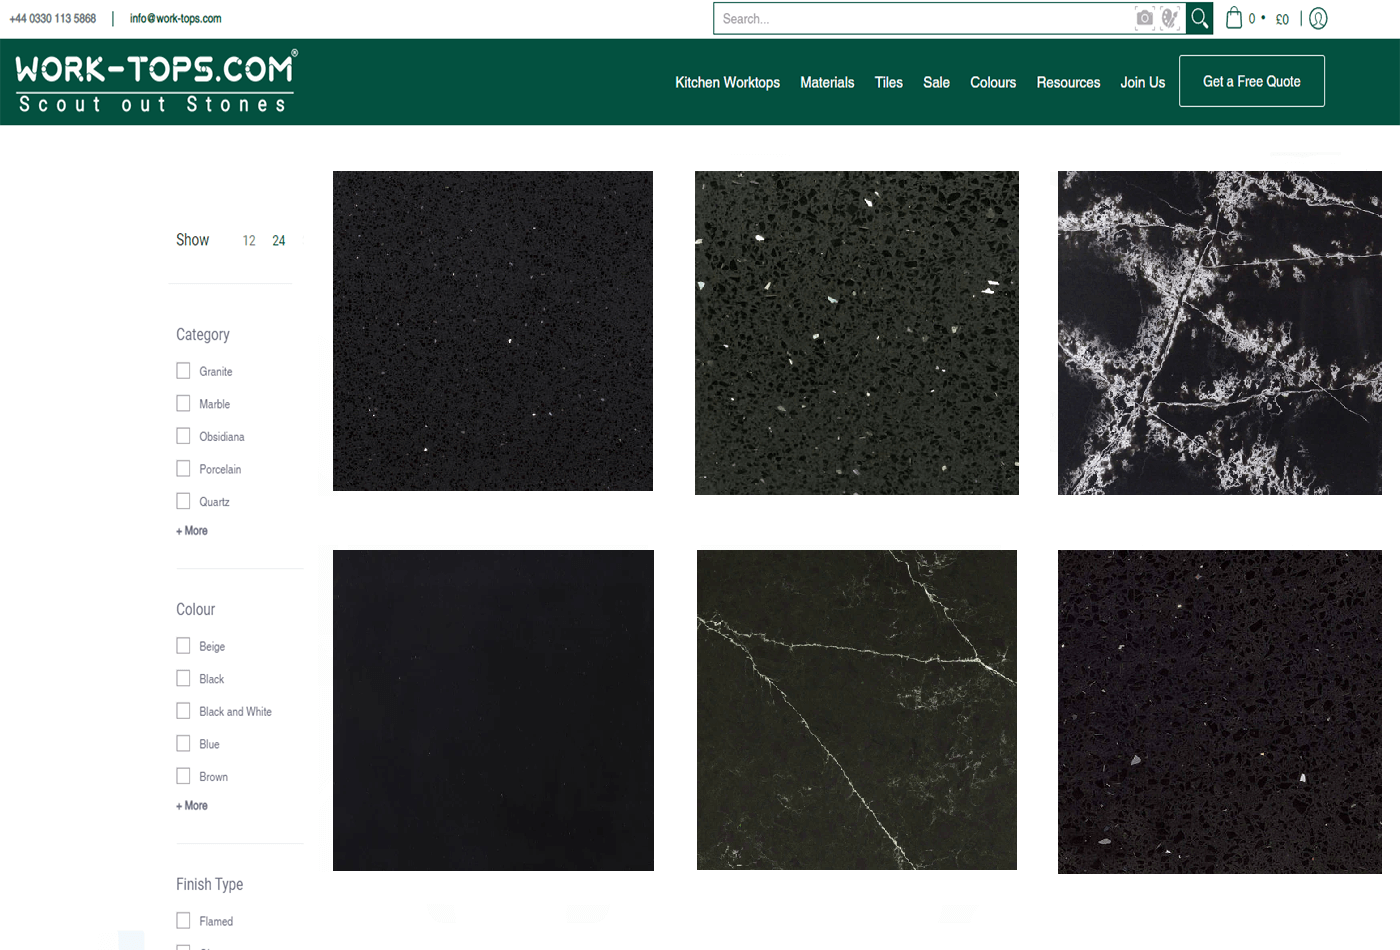 Check out our Other Similar Dark Stones that will Brighten your Space